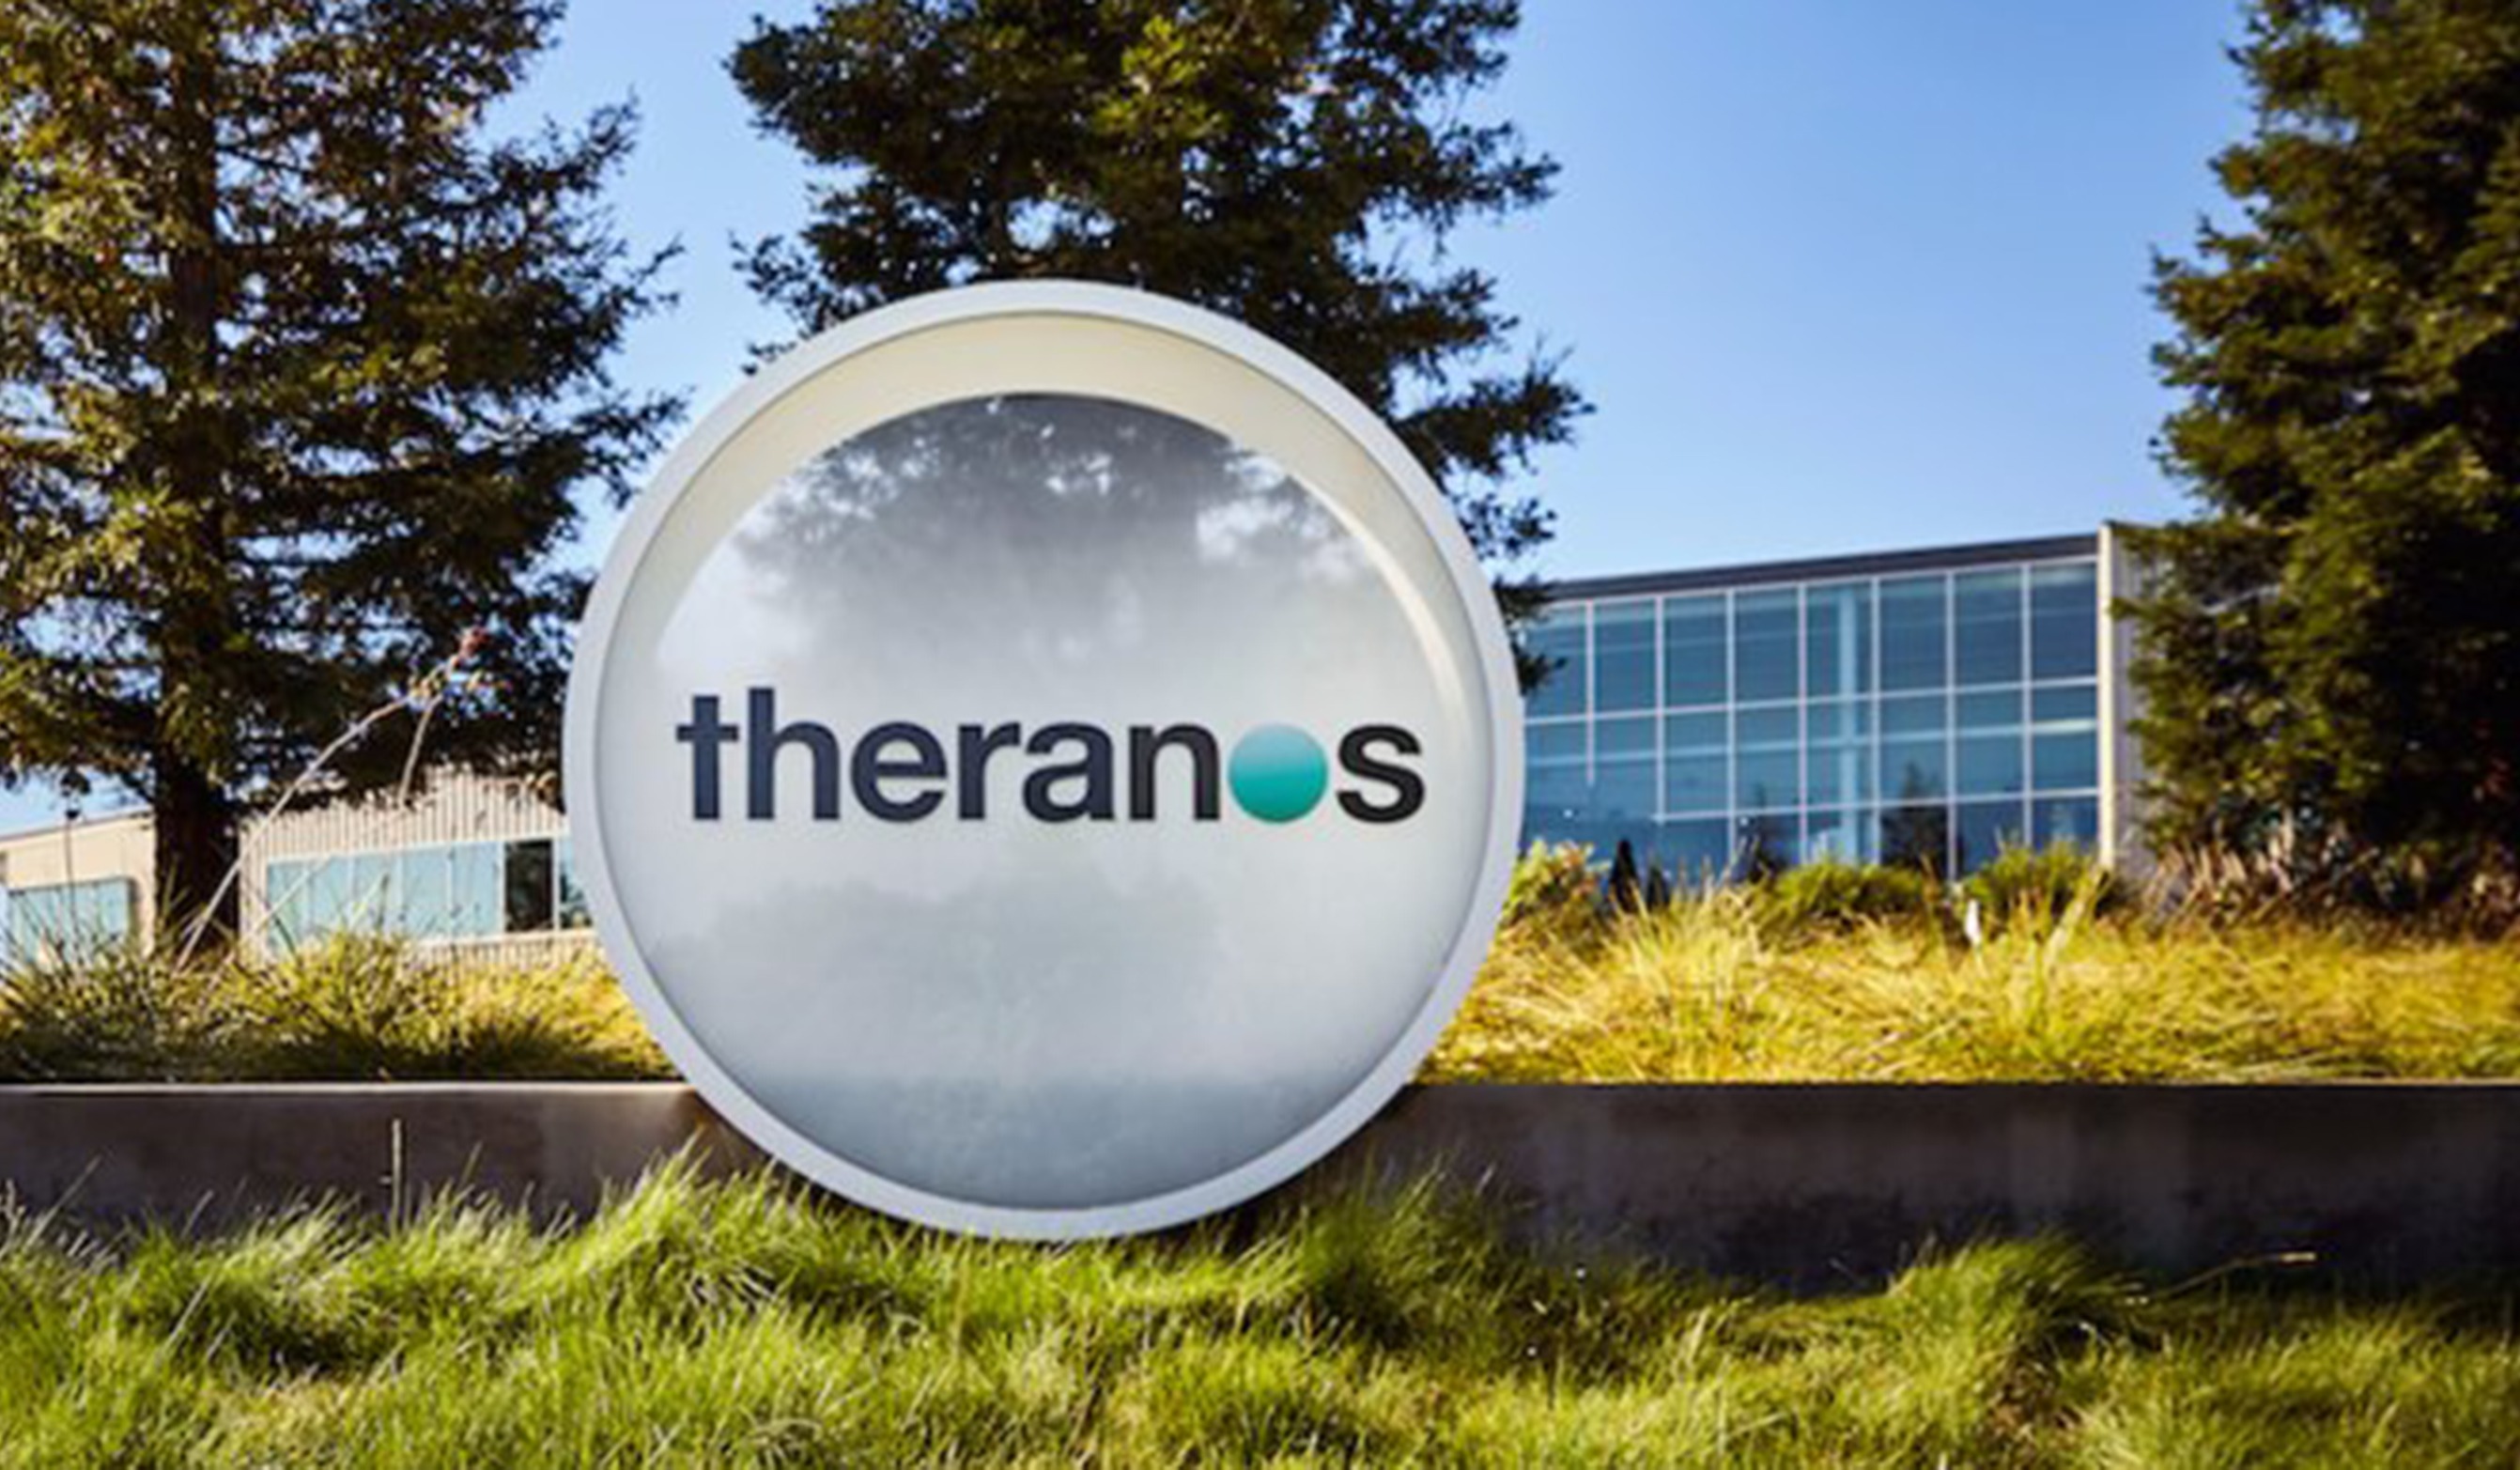 Theranos, disgraced blood sampling company